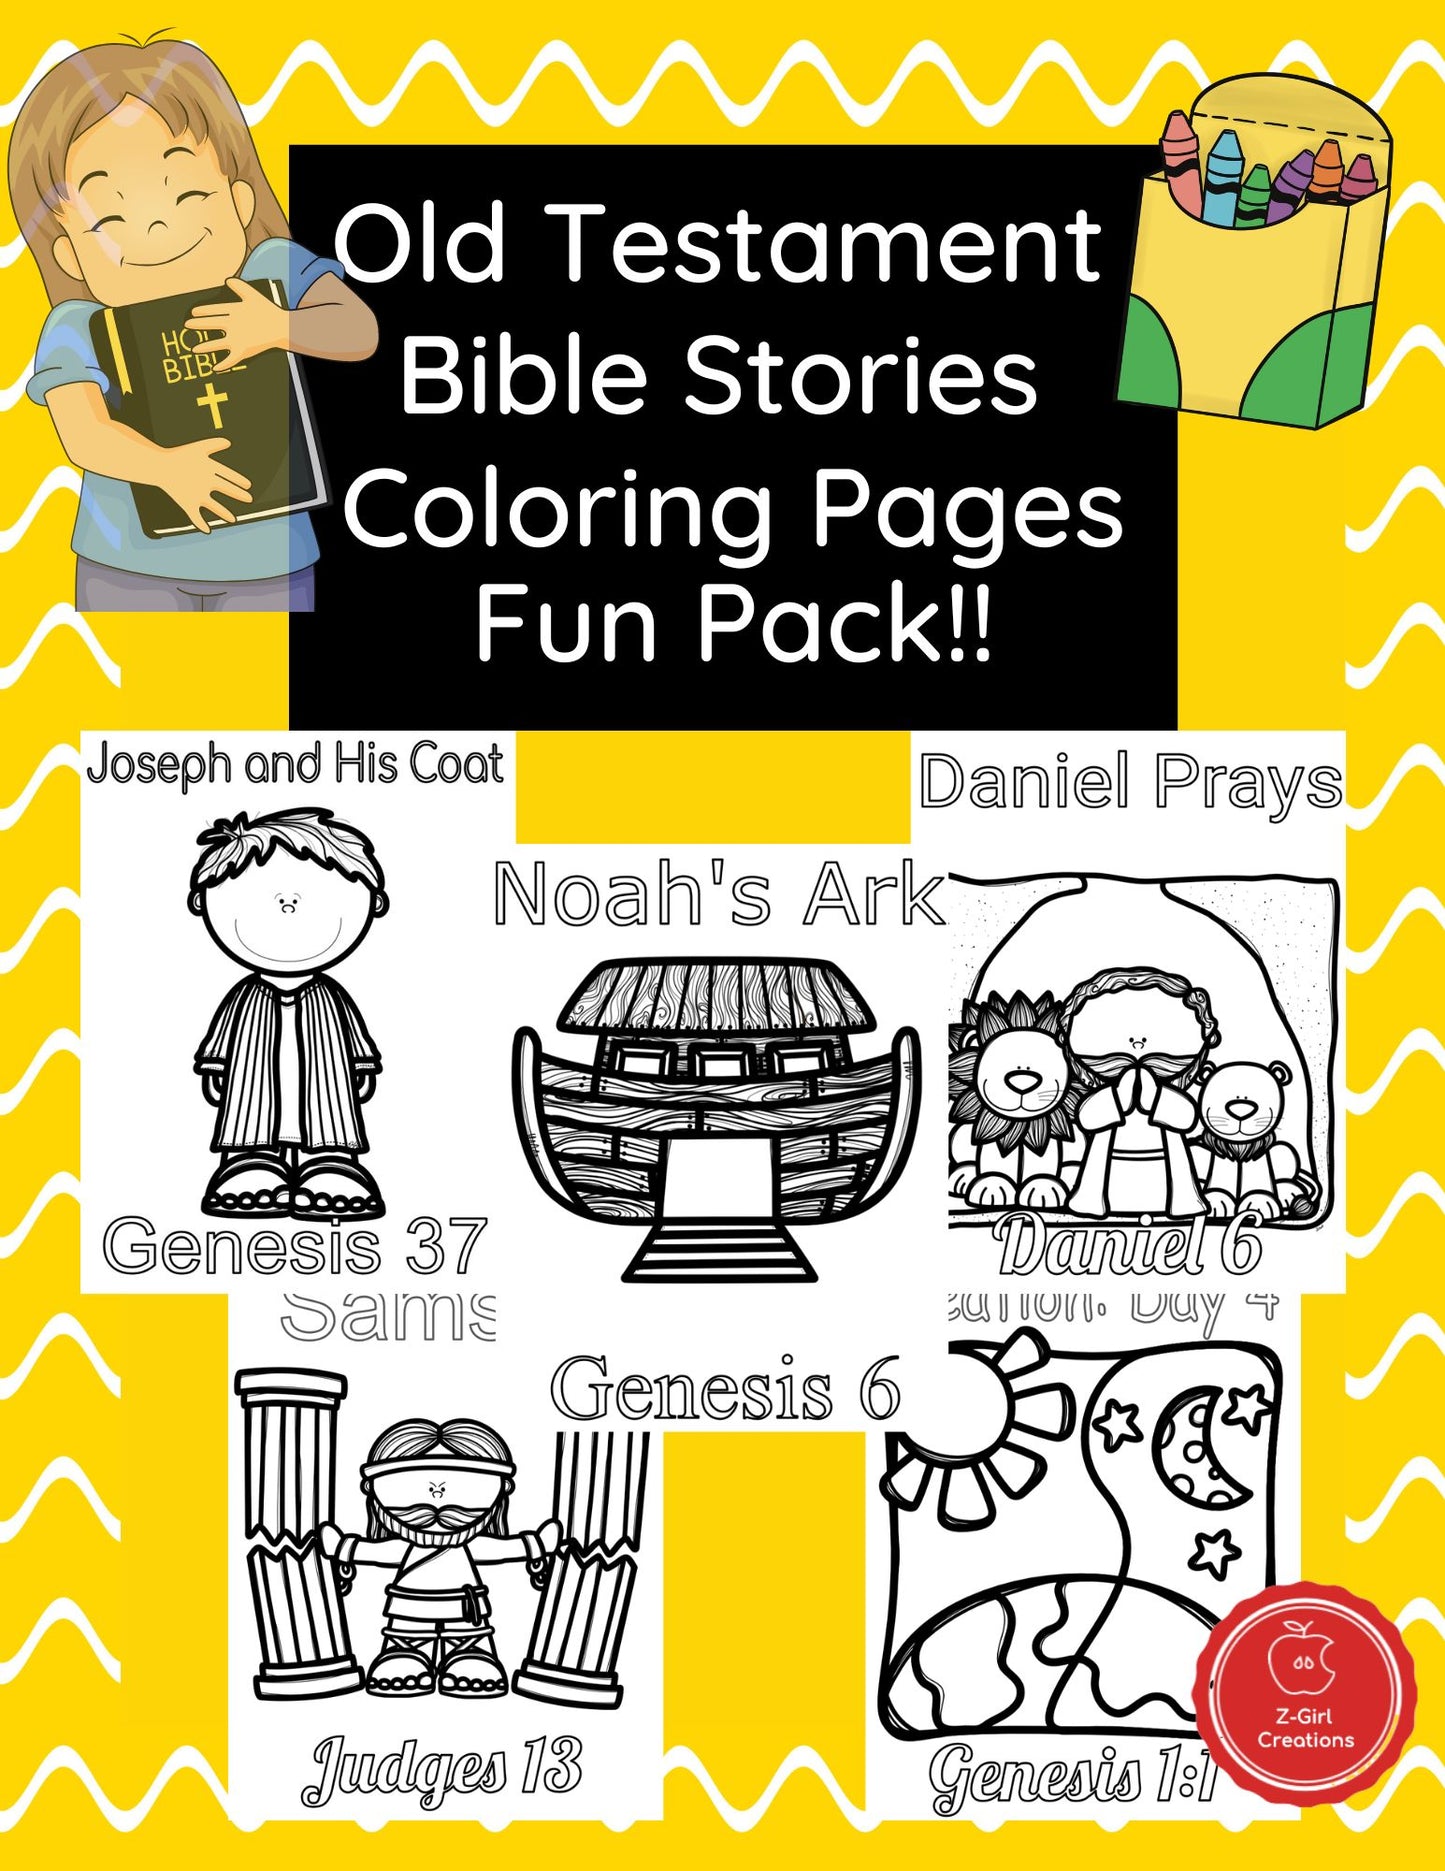 Old Testament Bible Stories Coloring Sheets Fun Pack!